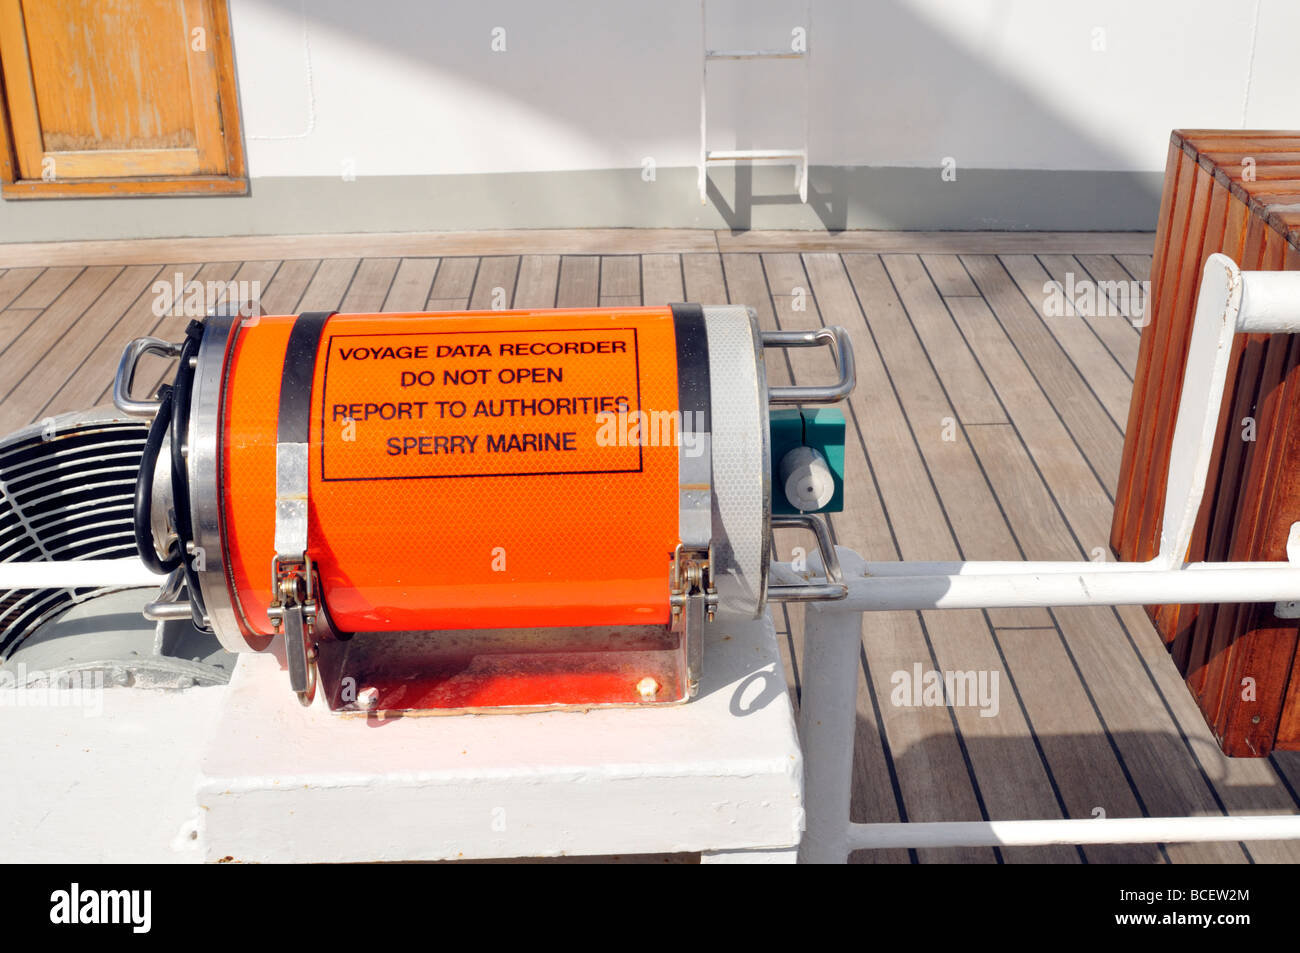 Voyage data recorder on a tall ship Stock Photo